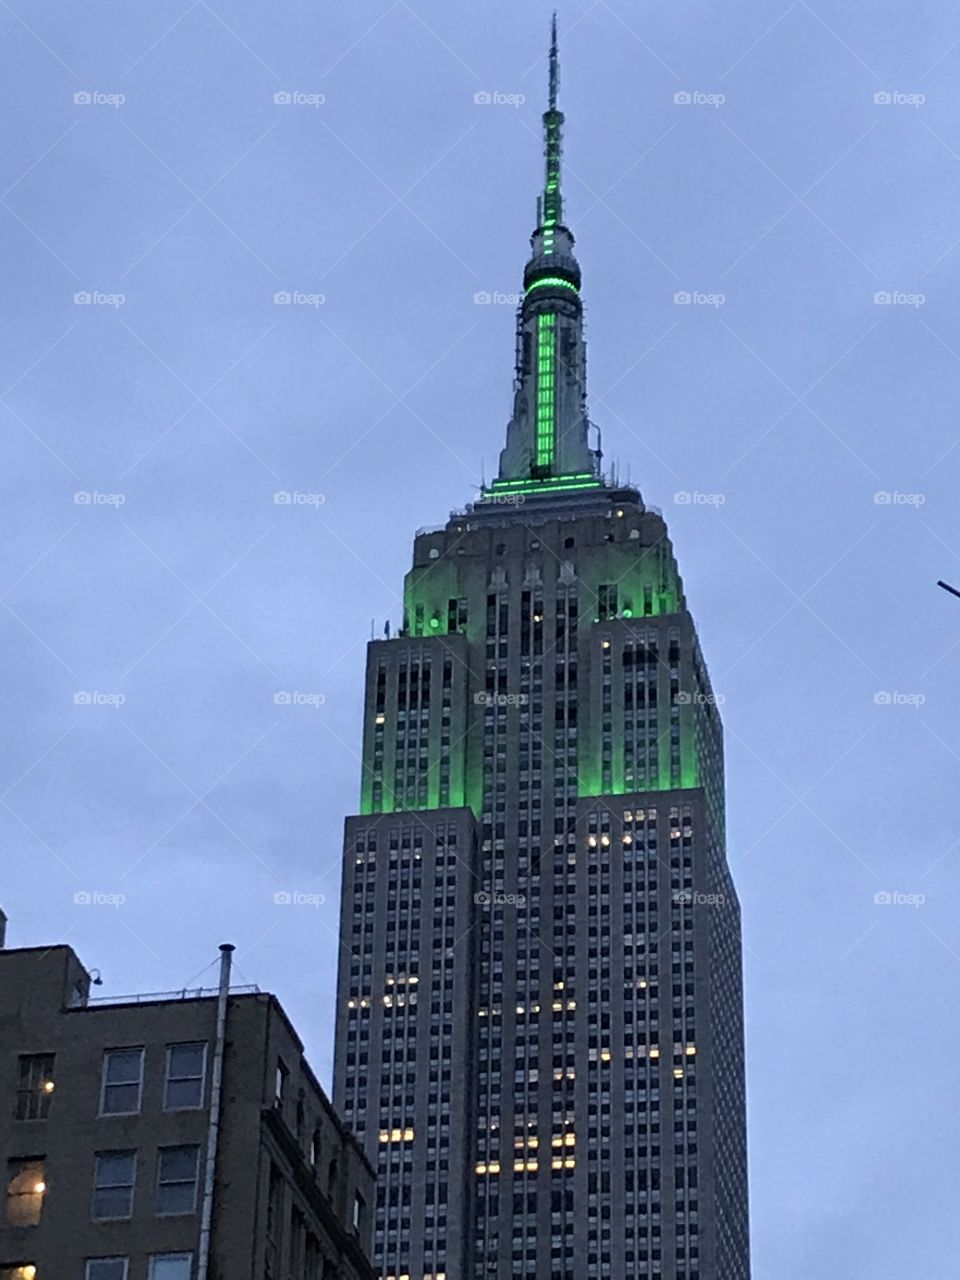 Empire State Building in New York lit up in green